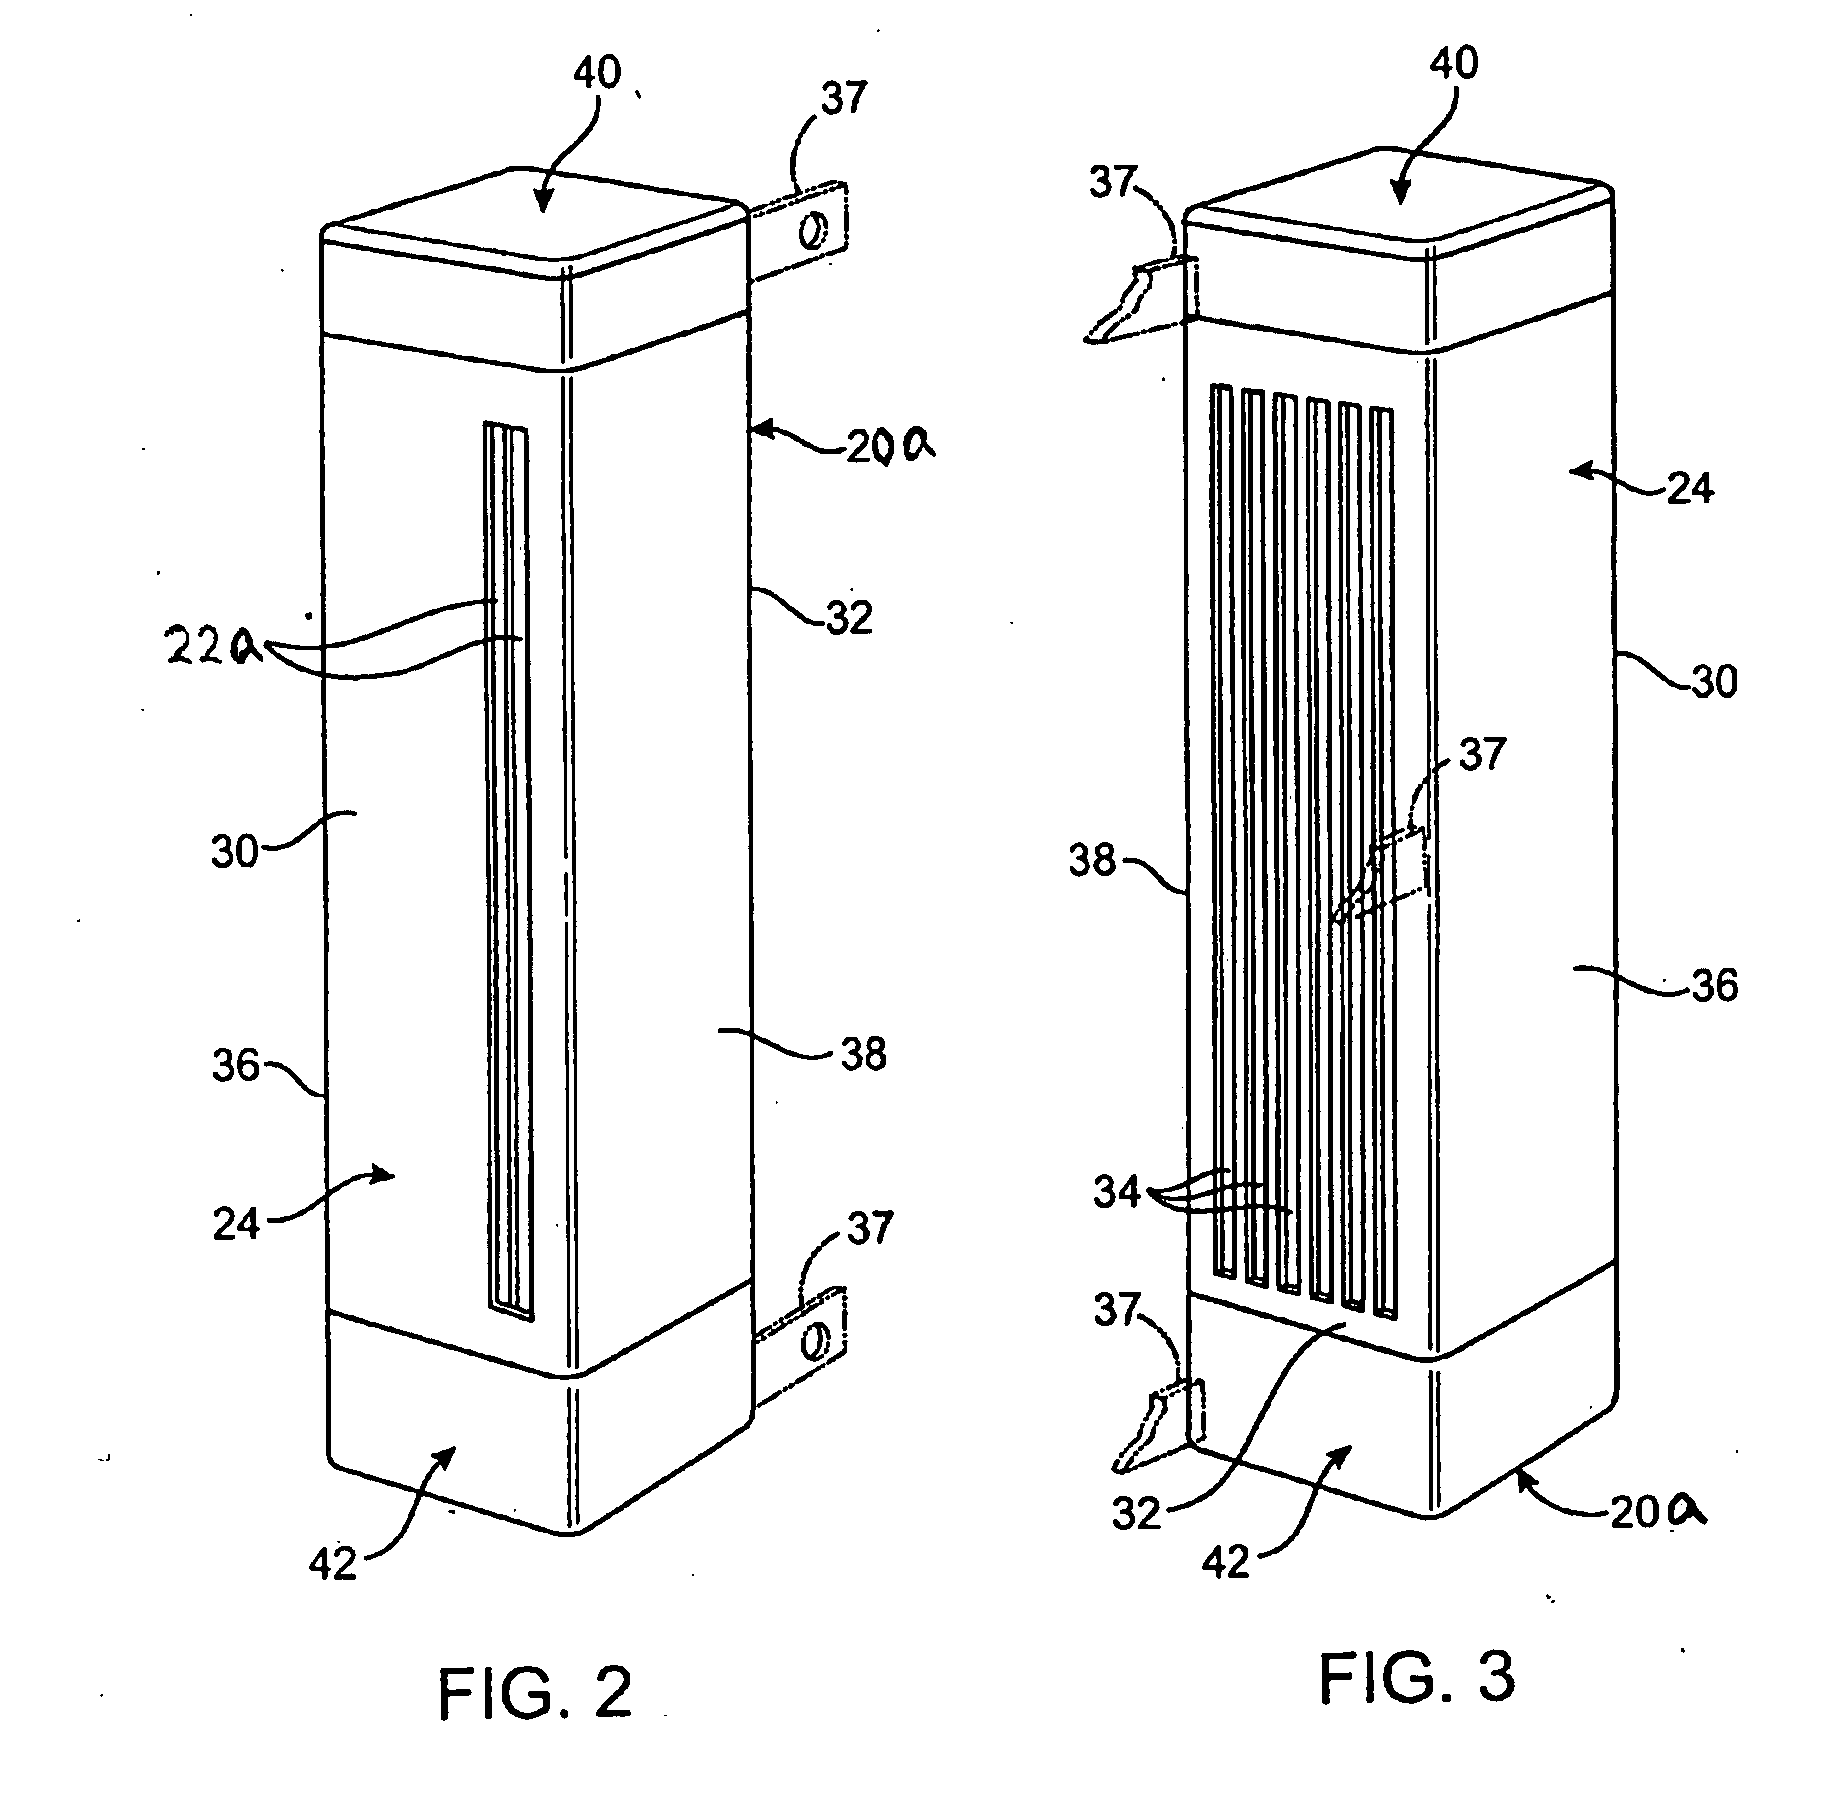 Cooling system with miniature fans for circuit board devices